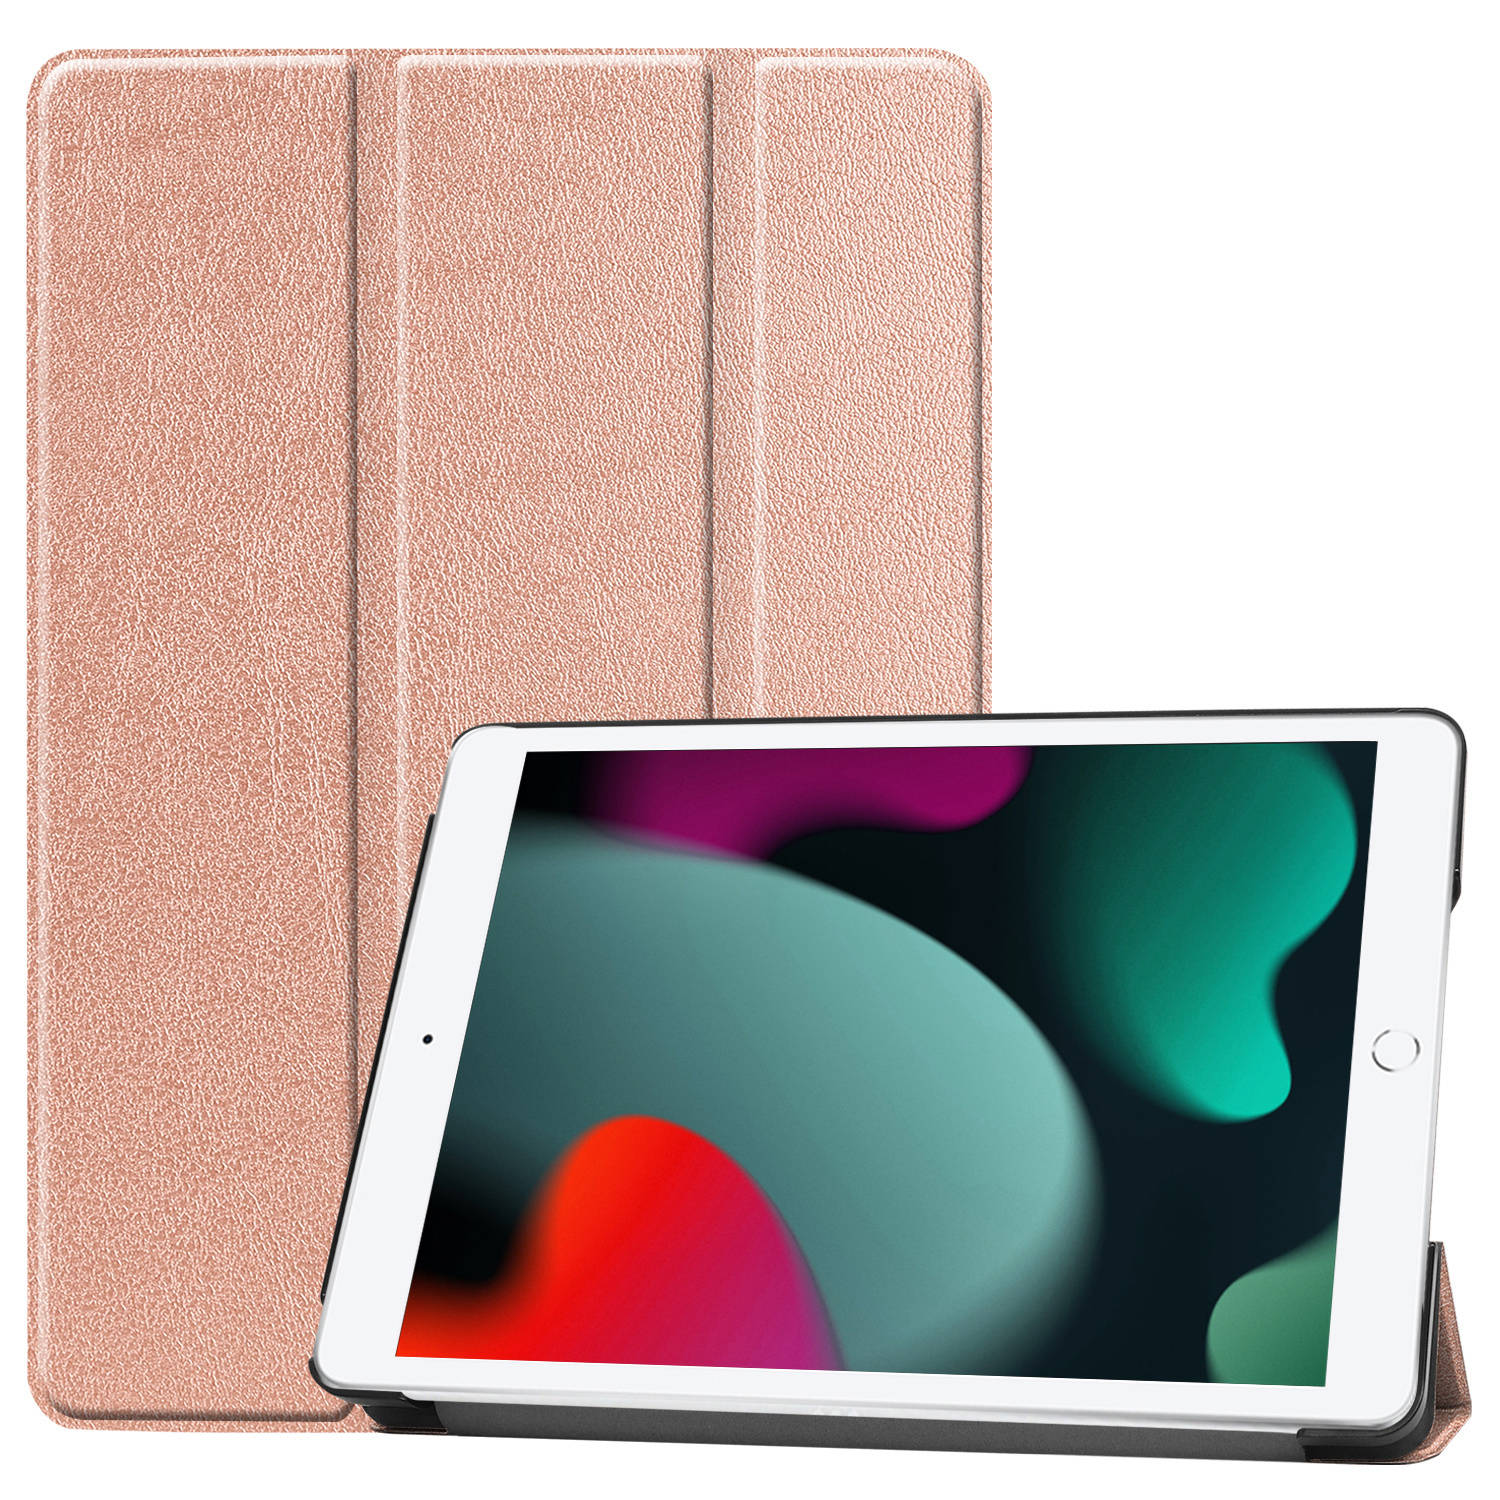 Basey Ipad 10.2 2019 Hoes Book Case Hoesje Ipad 10.2 2019 Hoesje Hard Cover Case Hoes Rose Goud